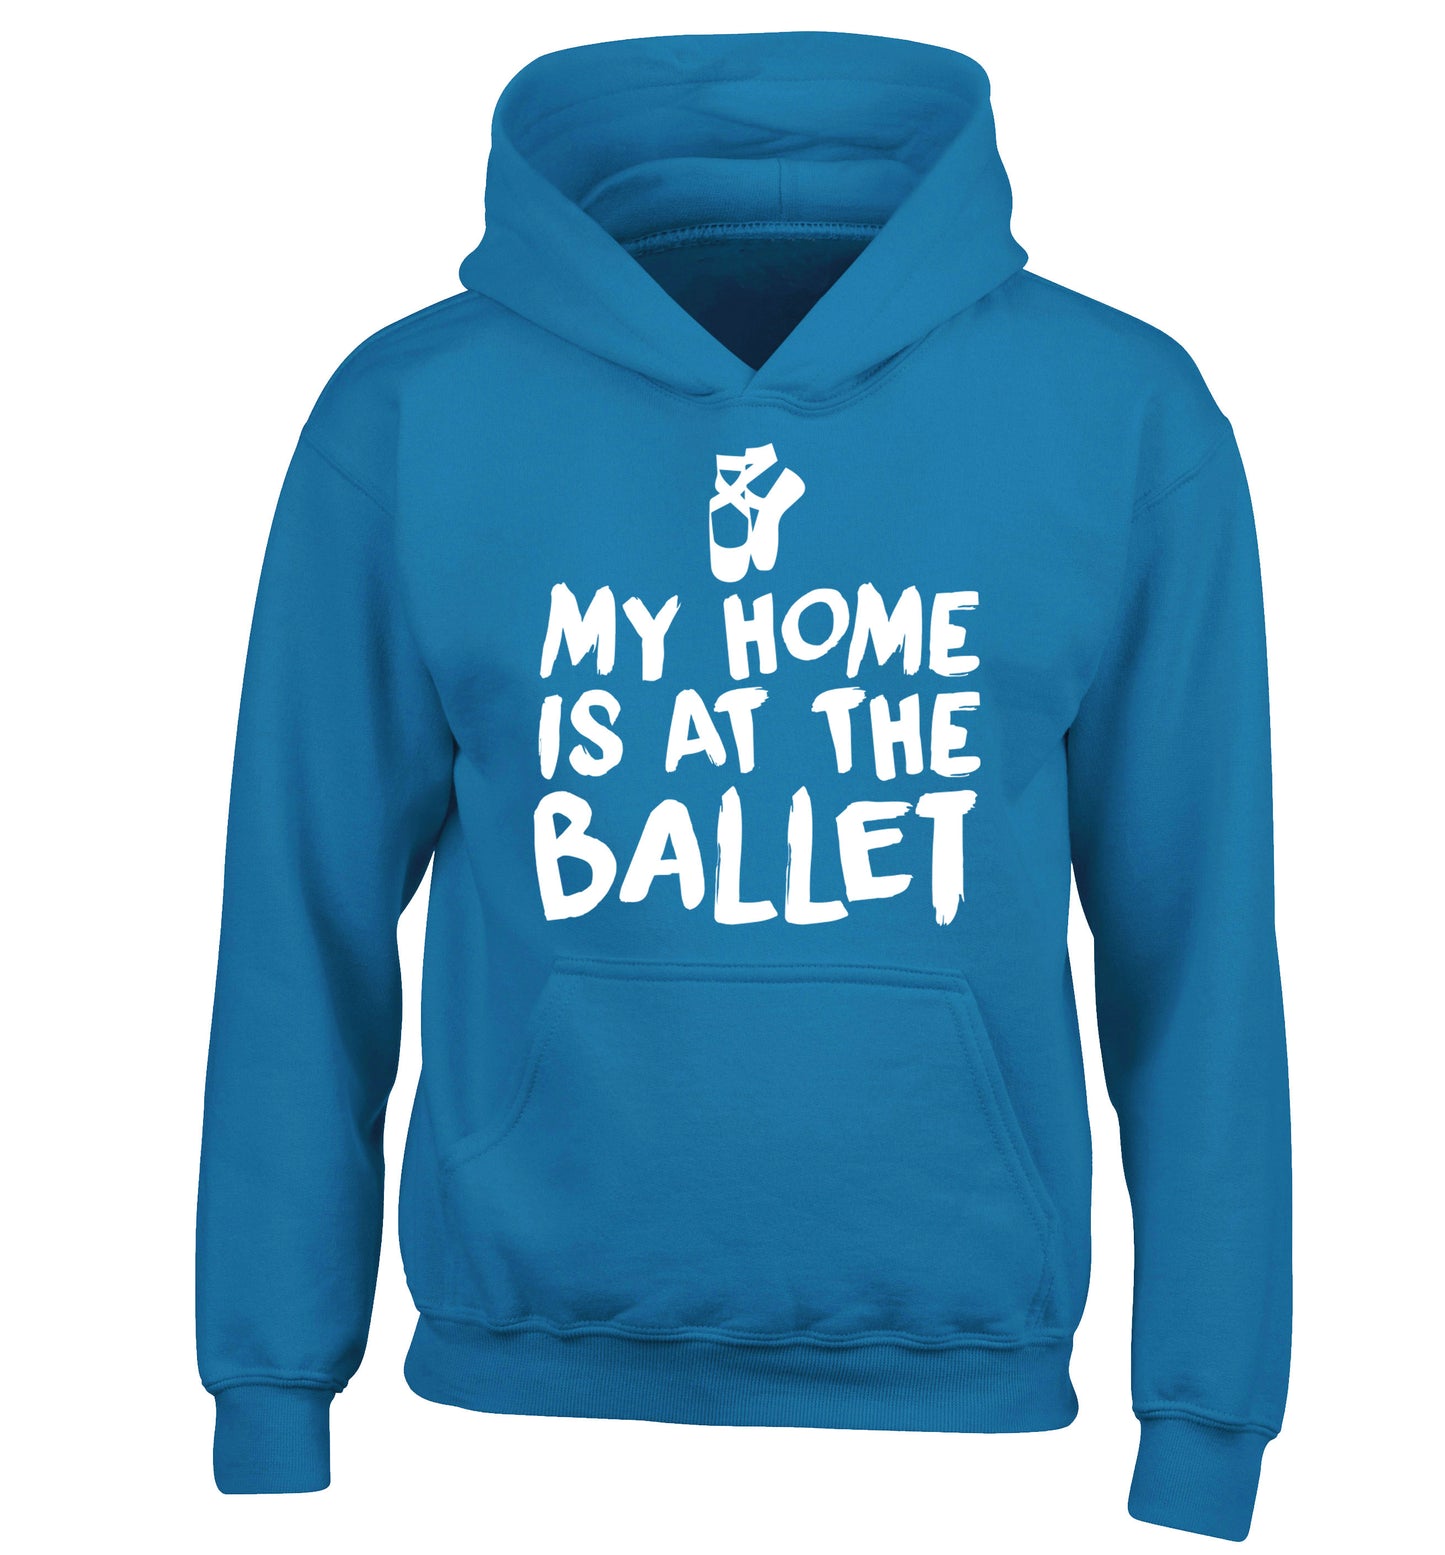 My home is at the dance studio children's blue hoodie 12-14 Years